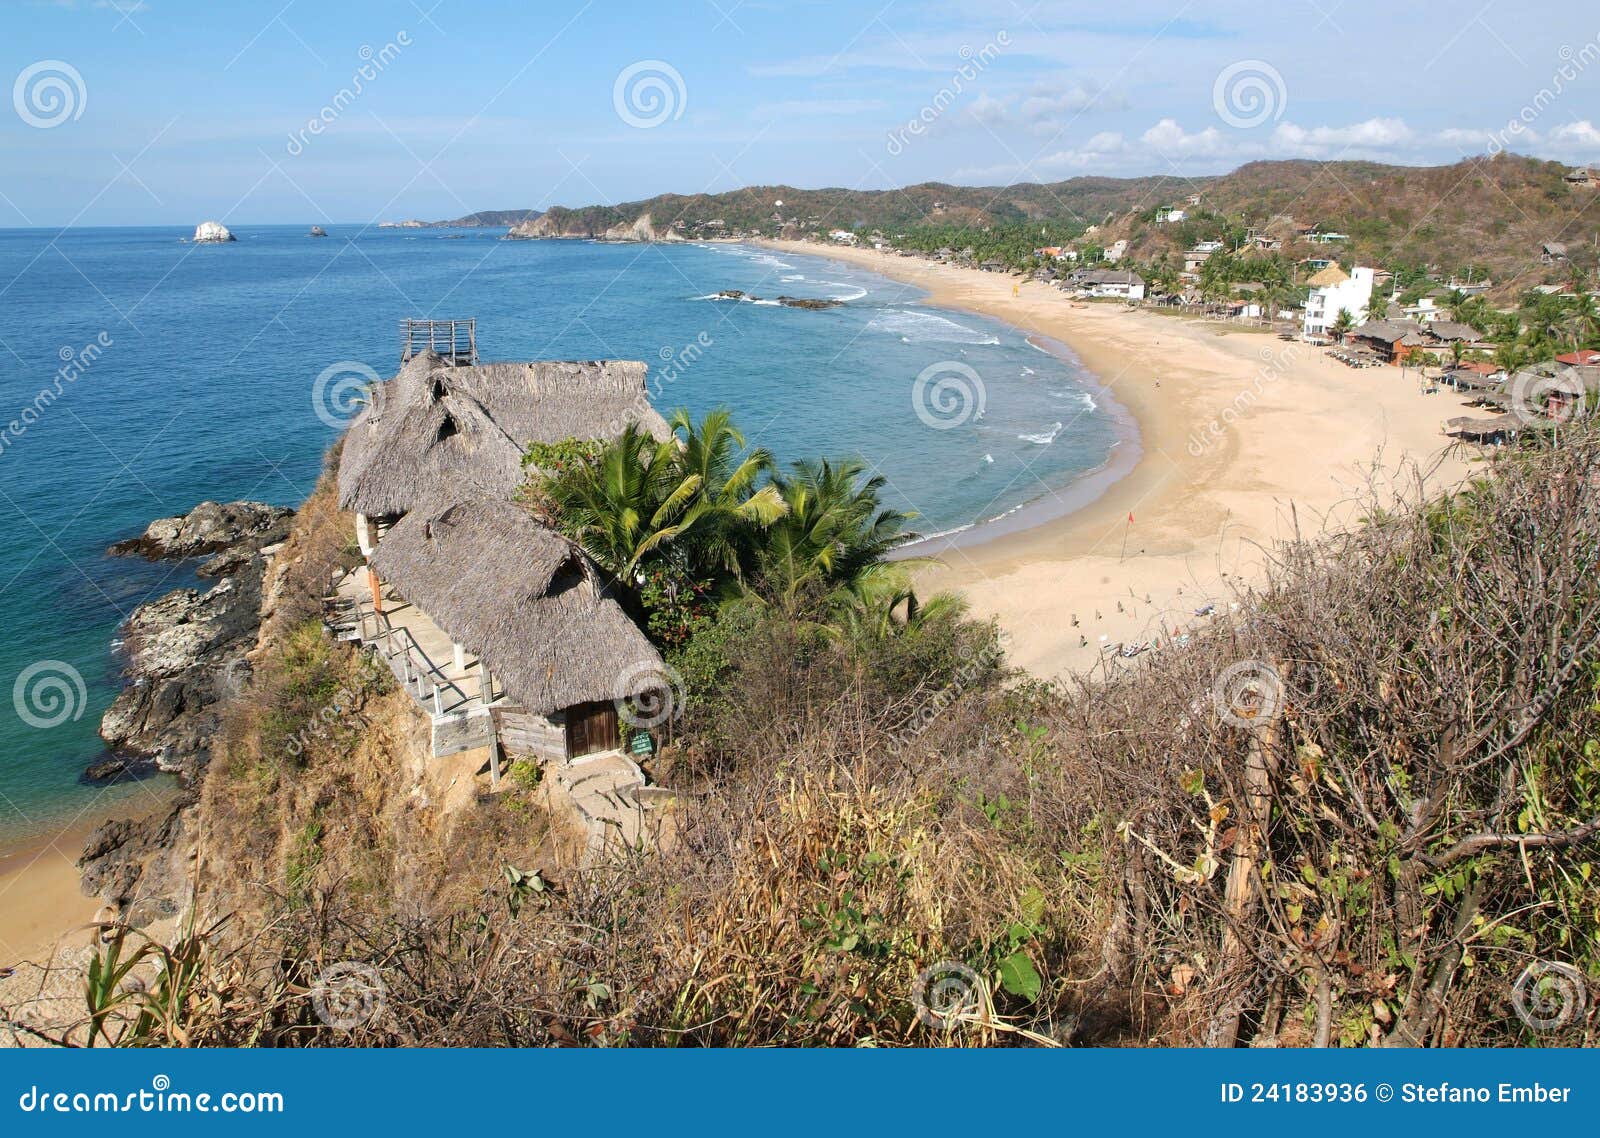 the beach of zipolite on the state of oaxaca